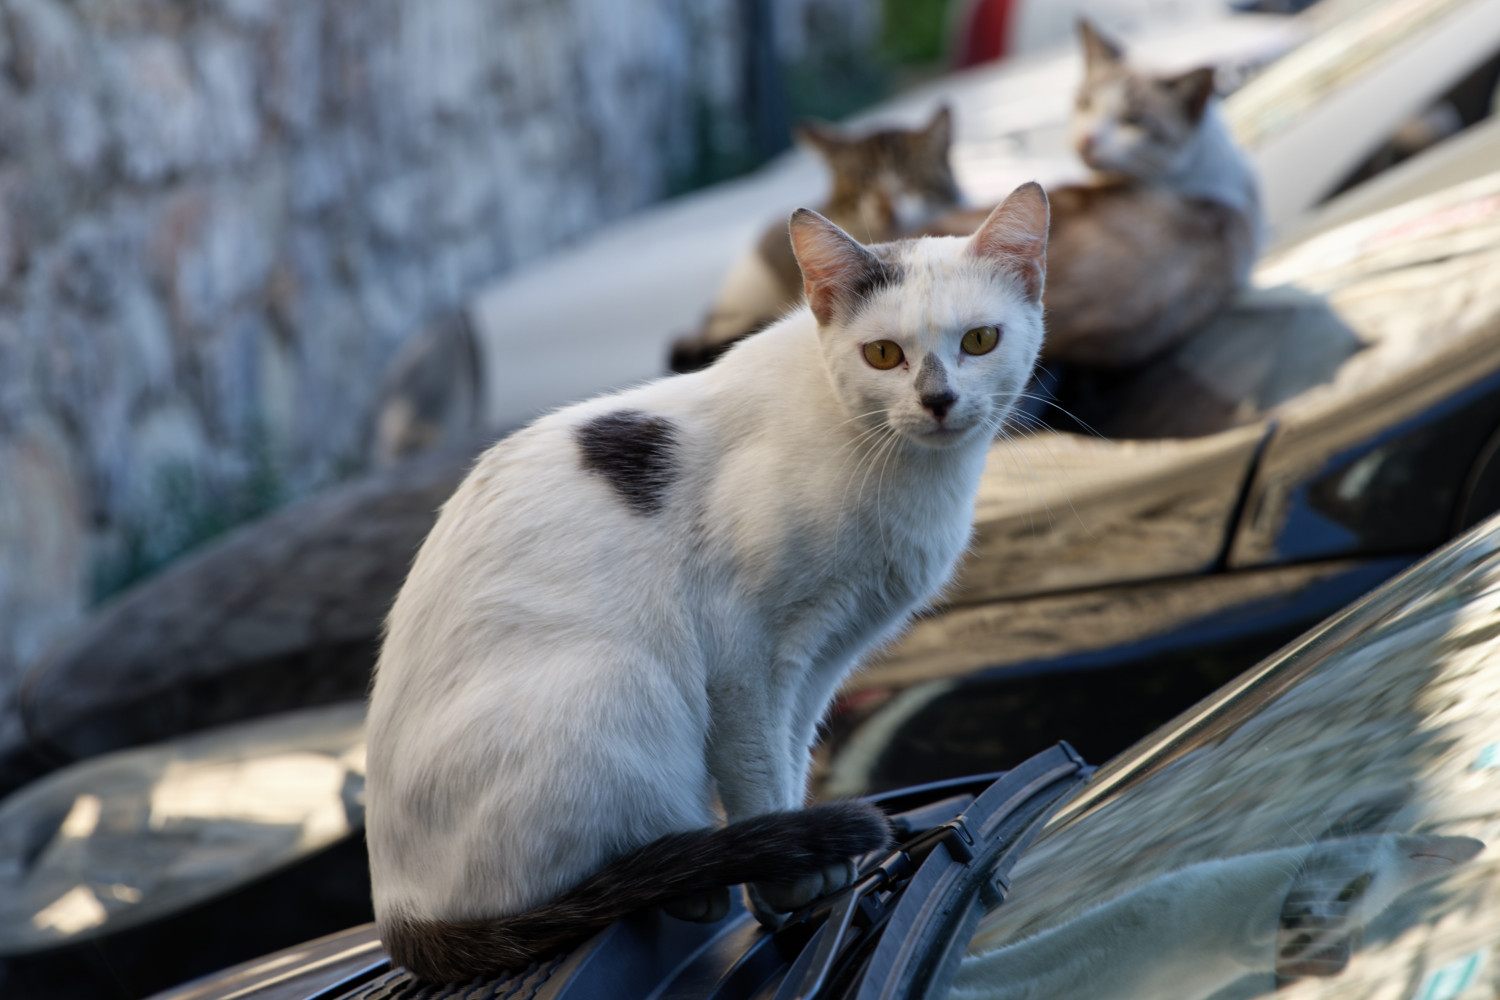 Street cats soaking up residual engine heat from parked cars